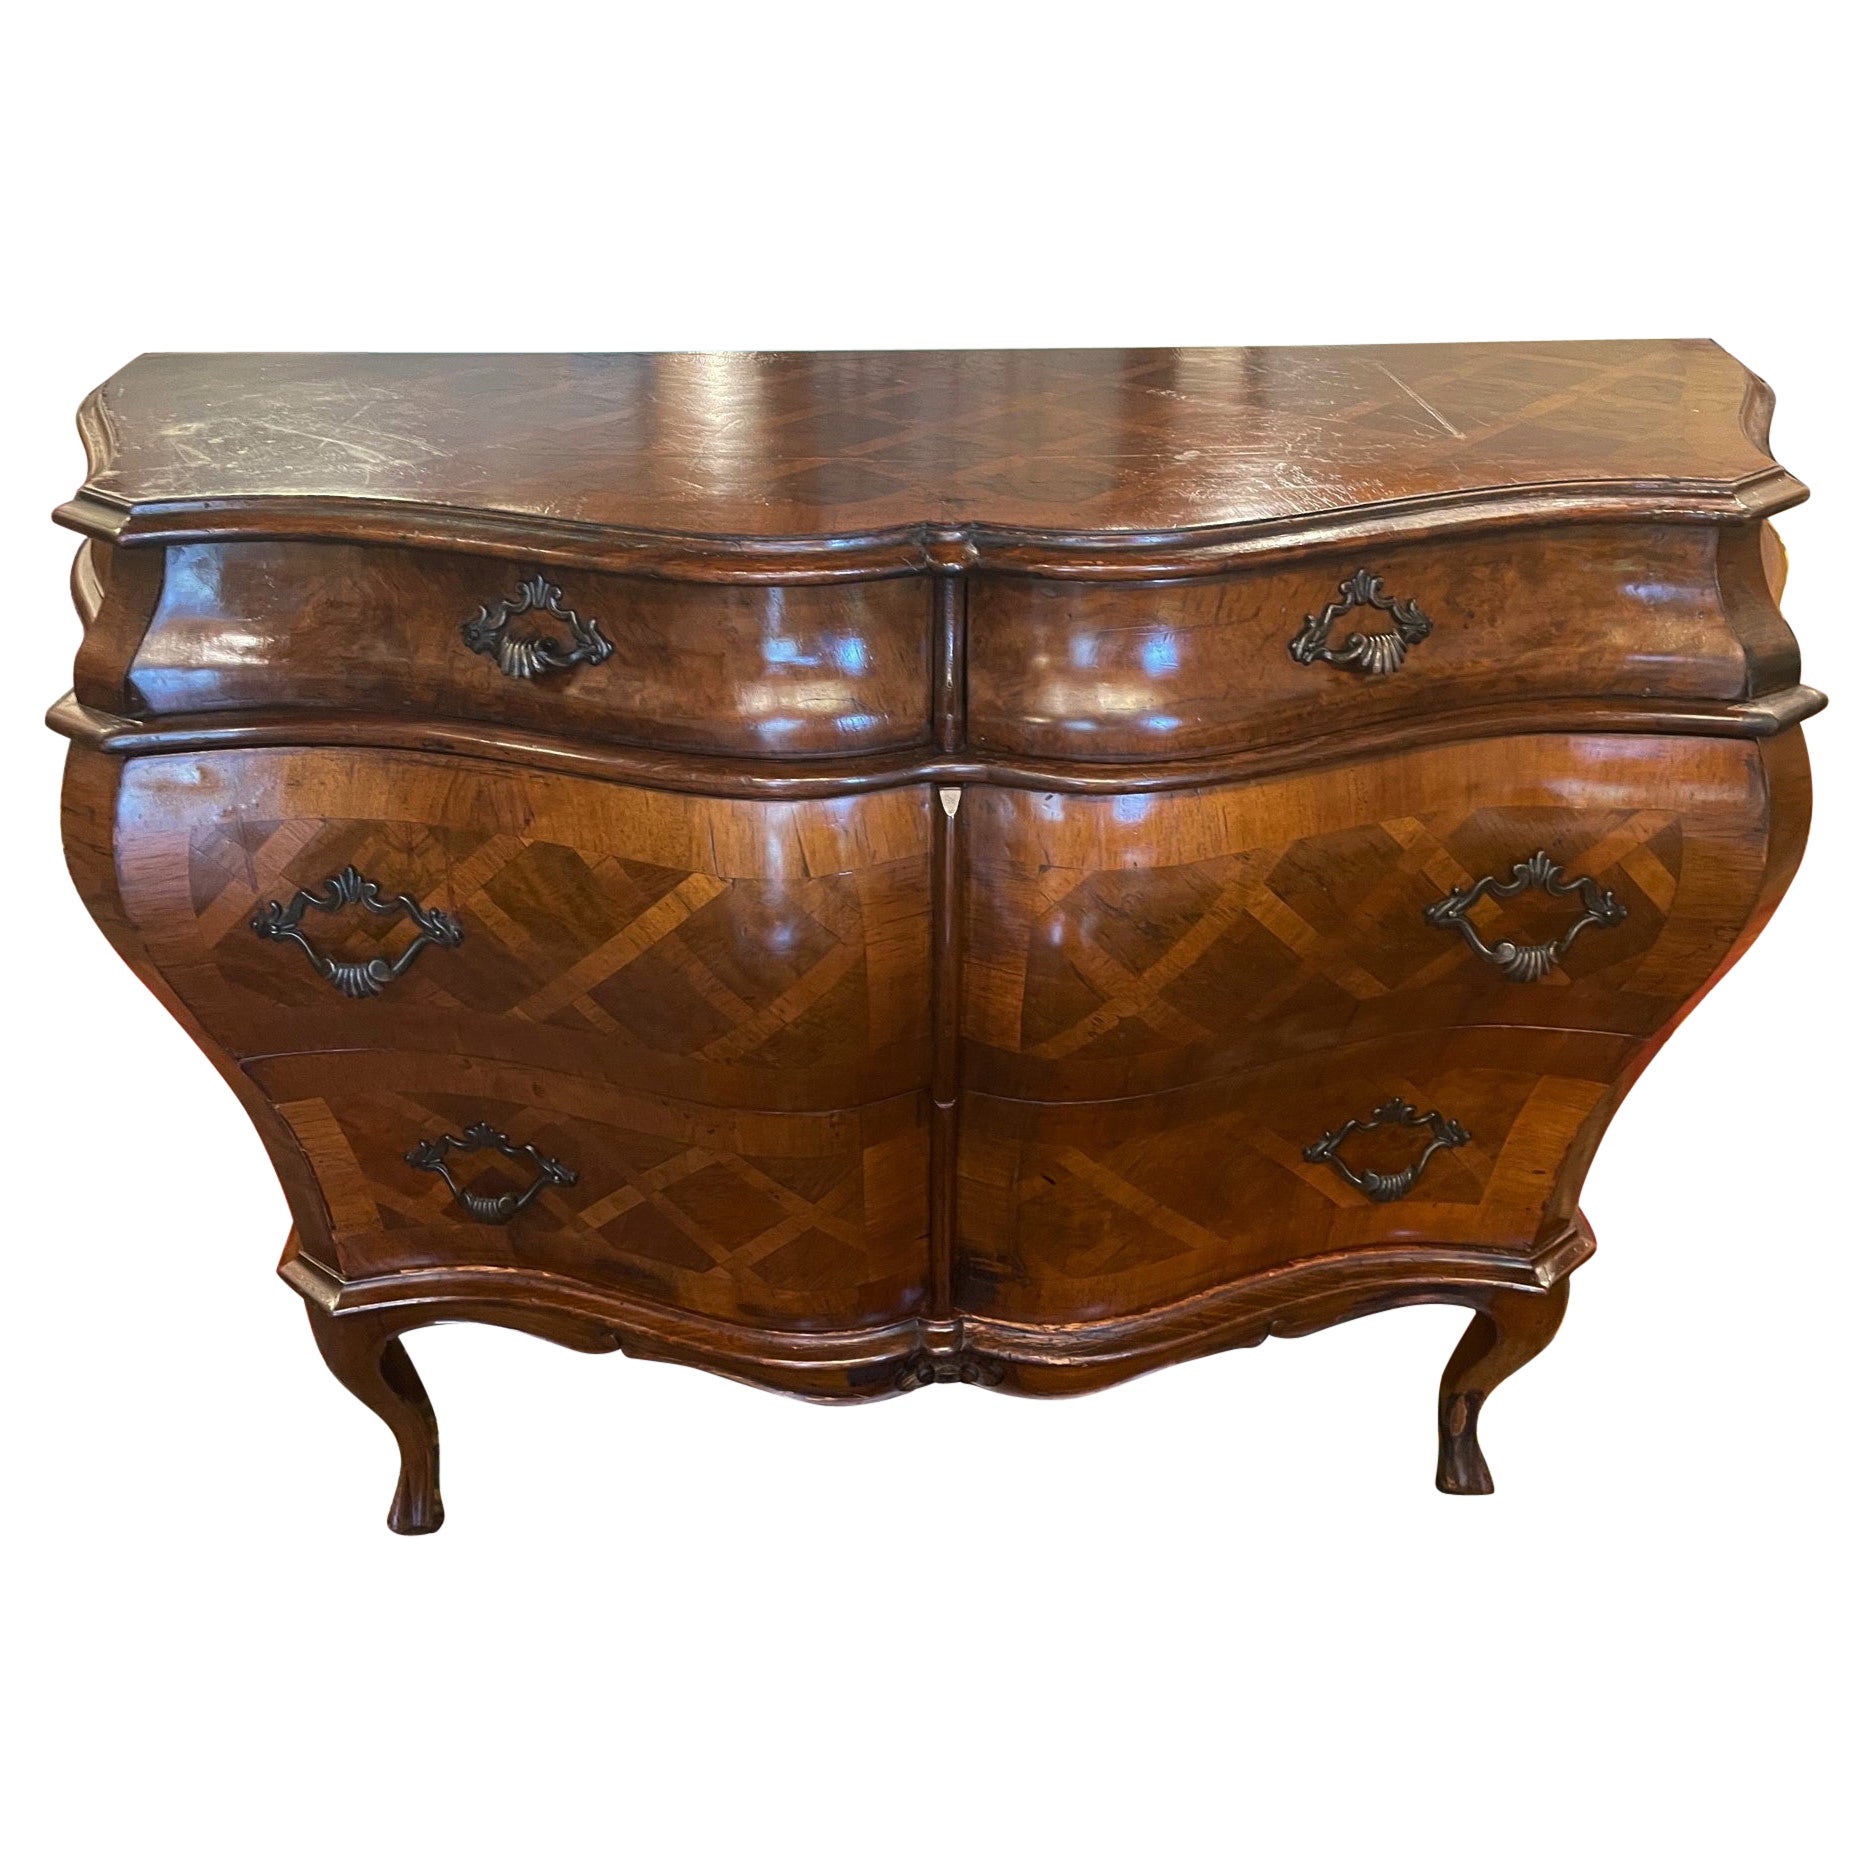 Italian Walnut Parquetry Inlaid Bombe Sided Commode, Early 20th Century